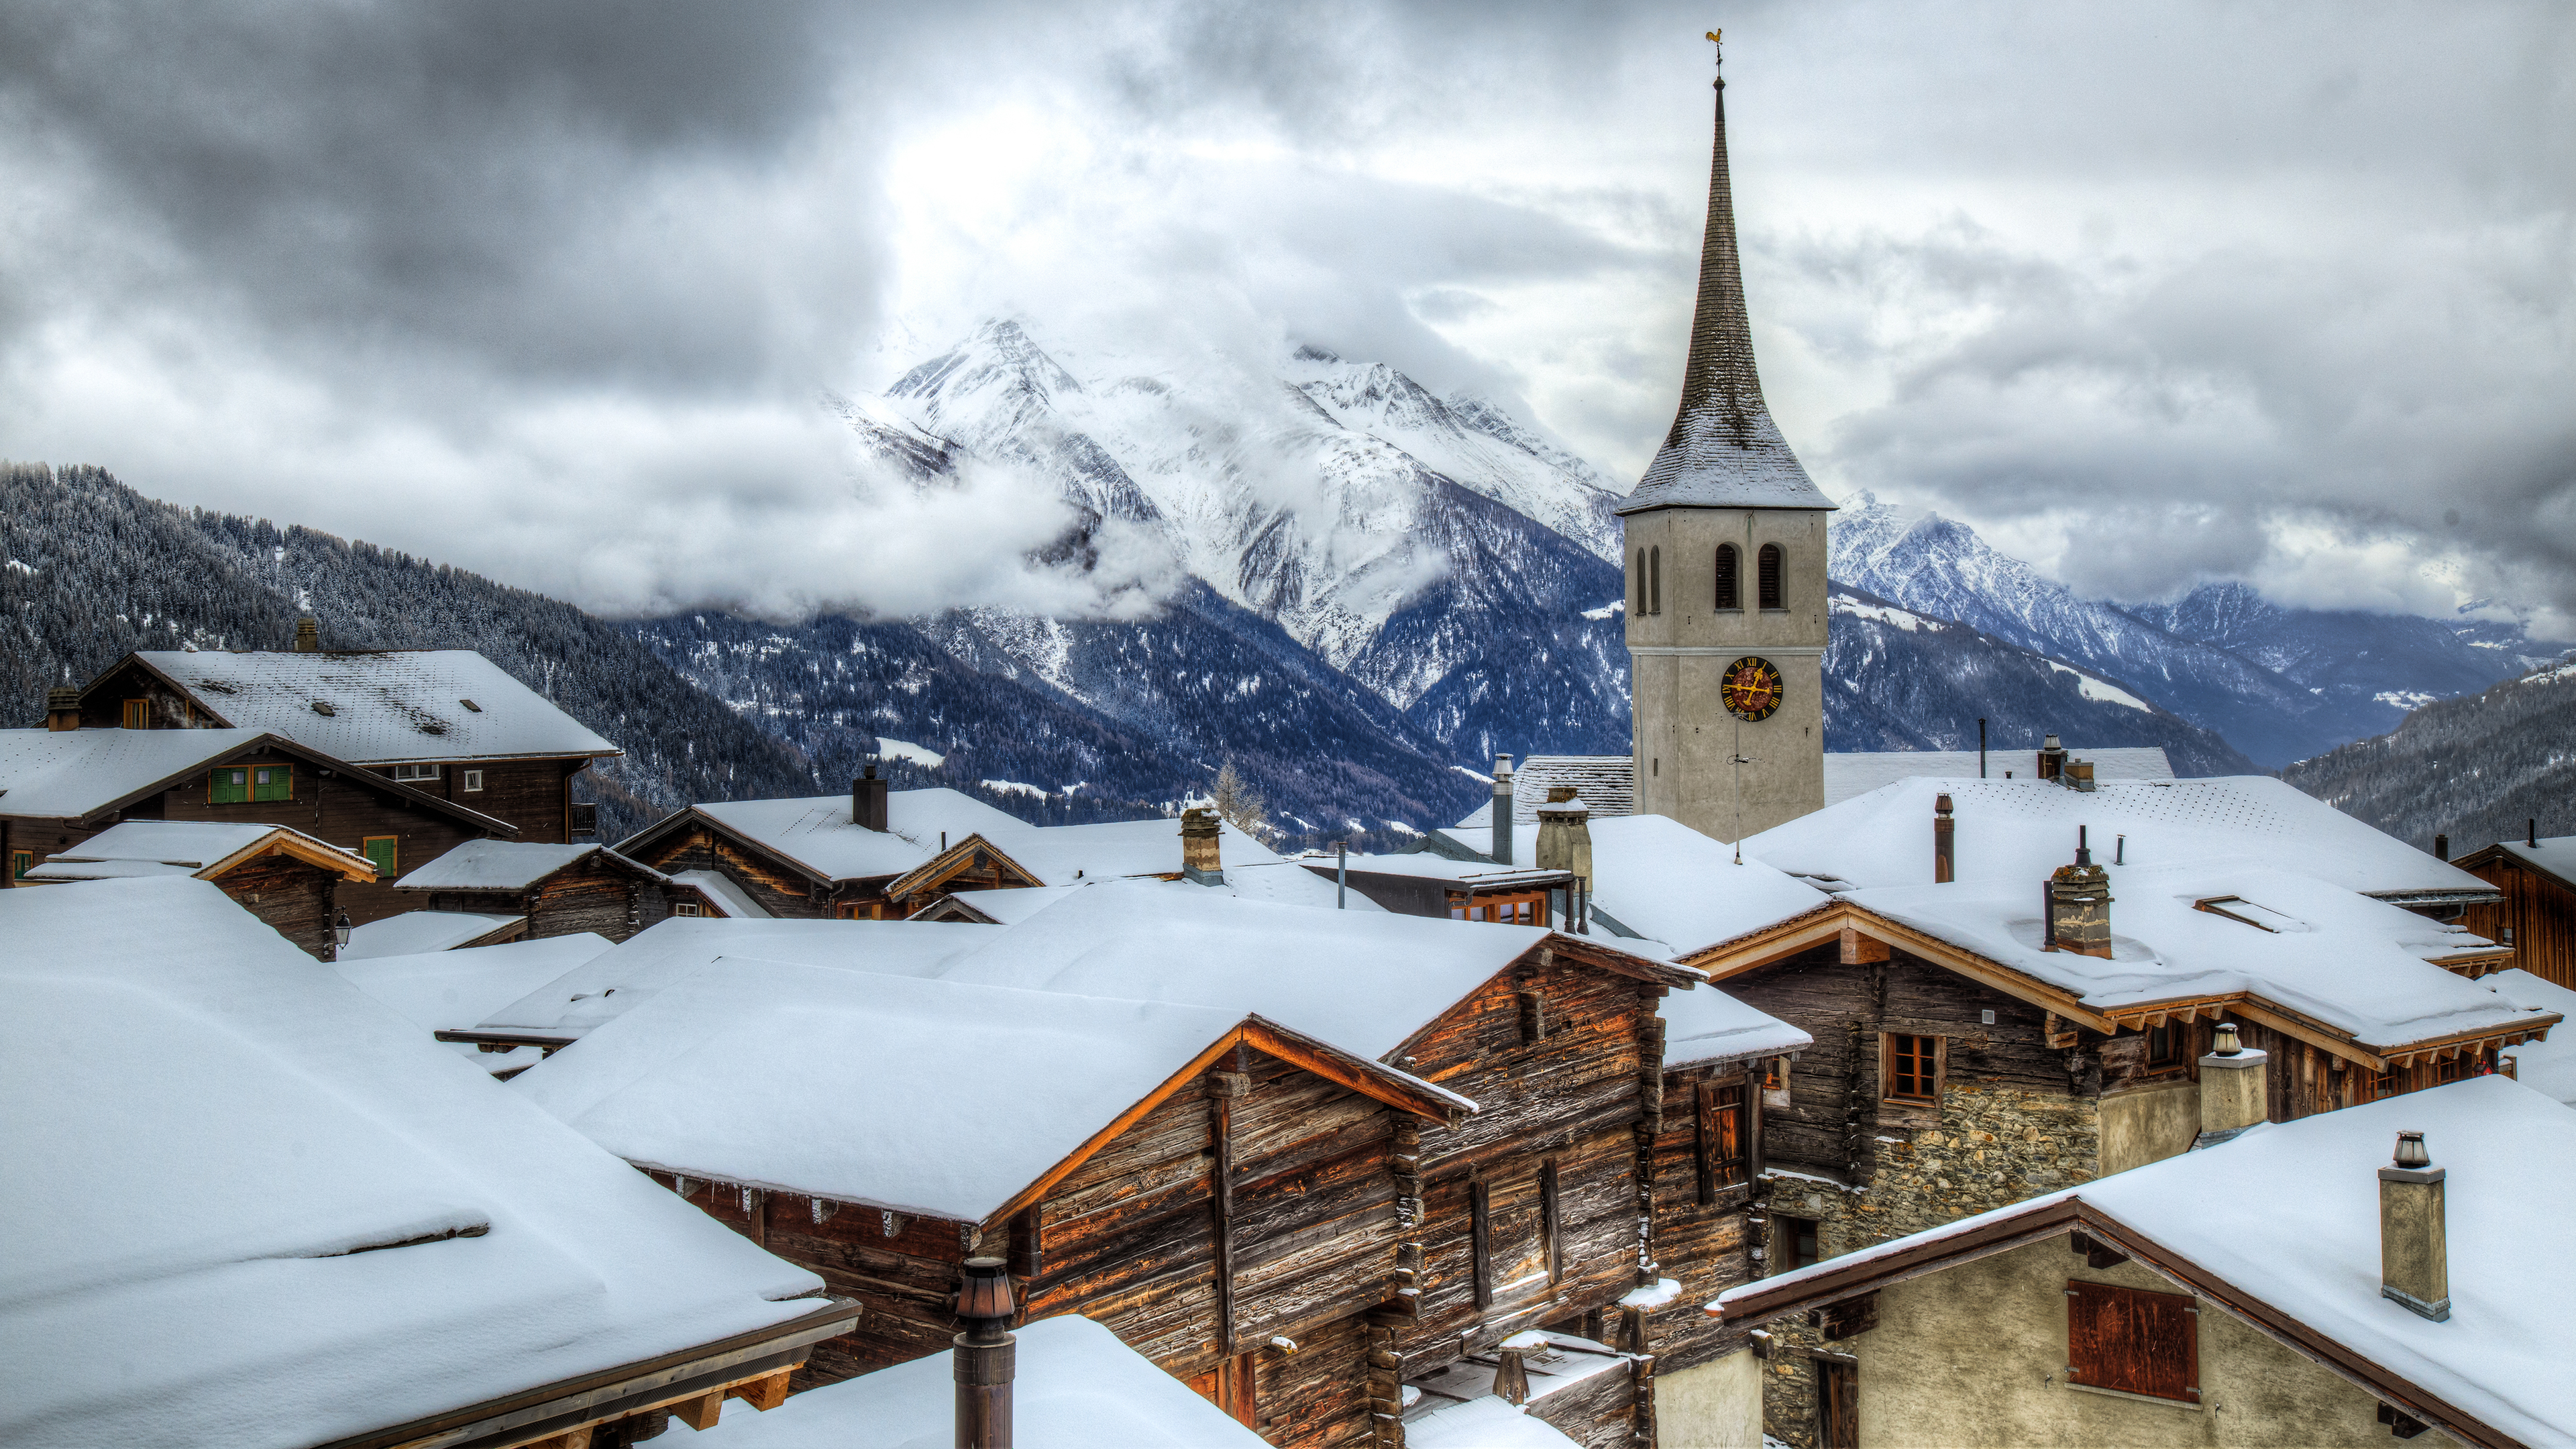 General 3840x2160 winter snow rooftops Austria Hallstatt snowy peak snow covered clouds mountains village architecture building church house sky overcast